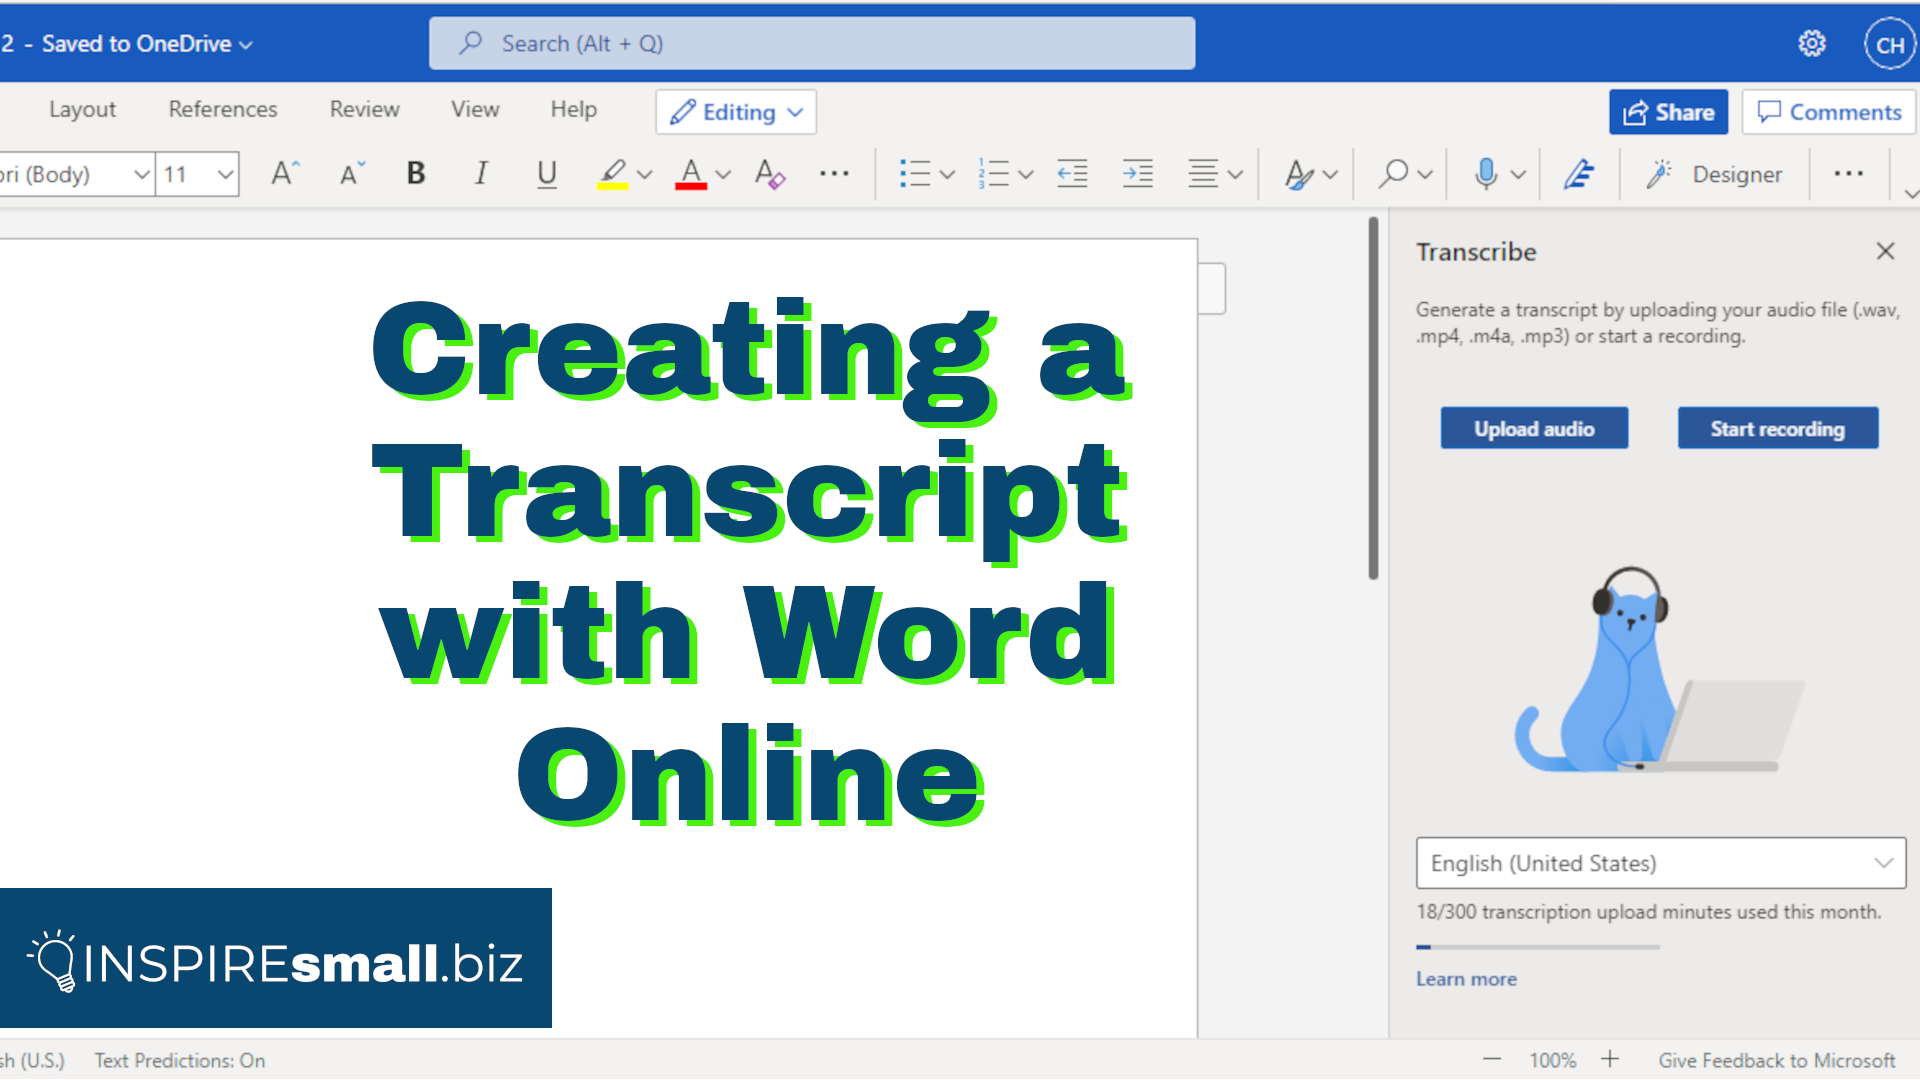 Creating a Transcript with Word Online. Tutorial from INSPIREsmall.biz